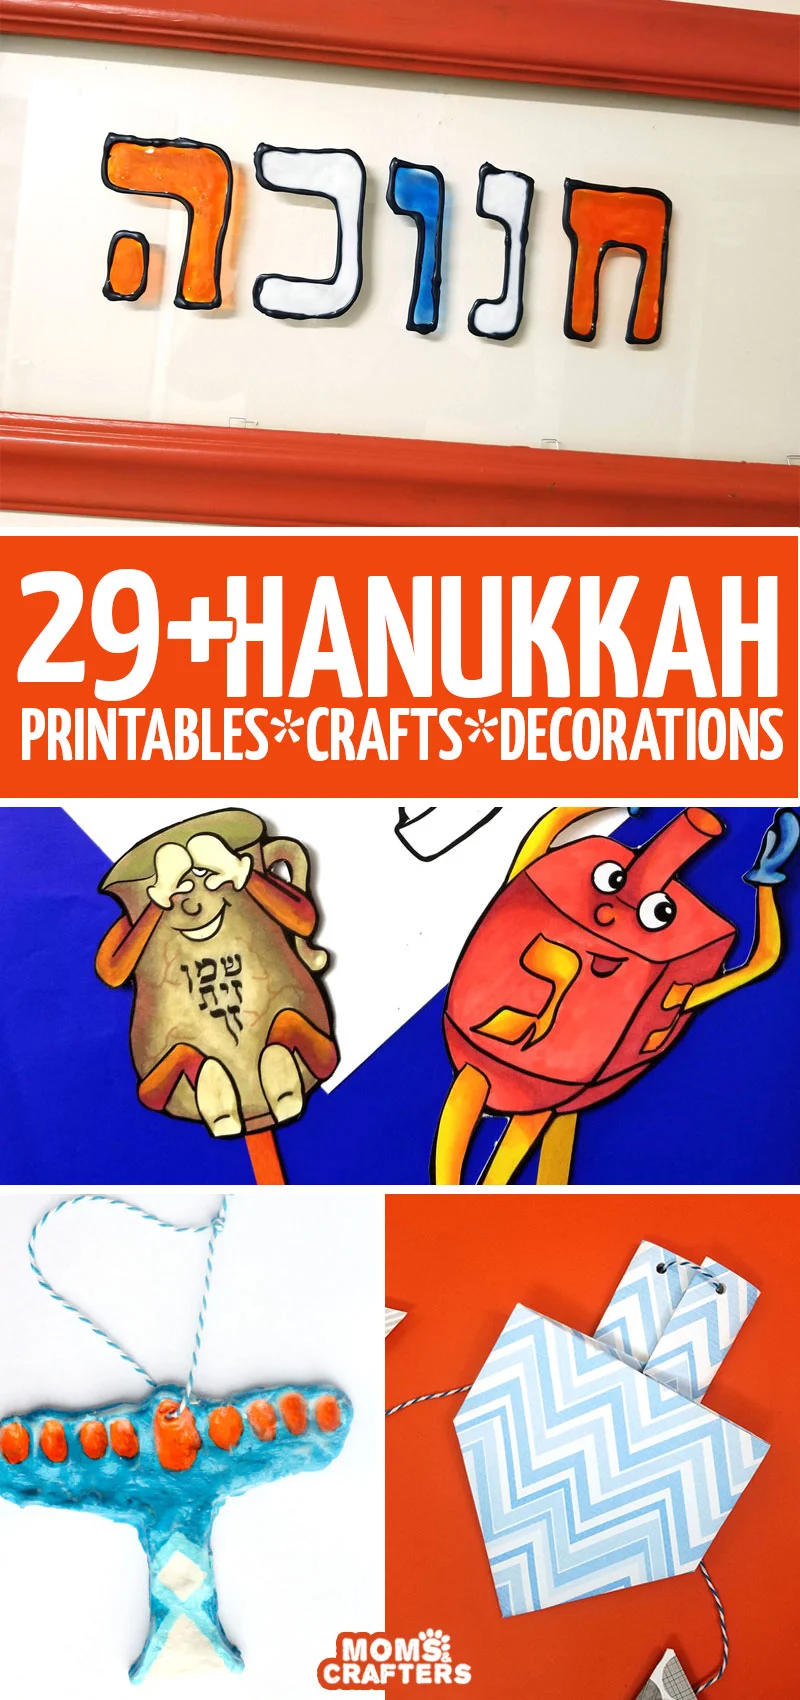 Over 30 Hanukkah crafts and ideas! This huge list includes free printable hanukkah coloring pages for kids and adults, Chanukah crafts for preschool, kids, teens ,and grown-ups, Hanukkah decorations, and more!